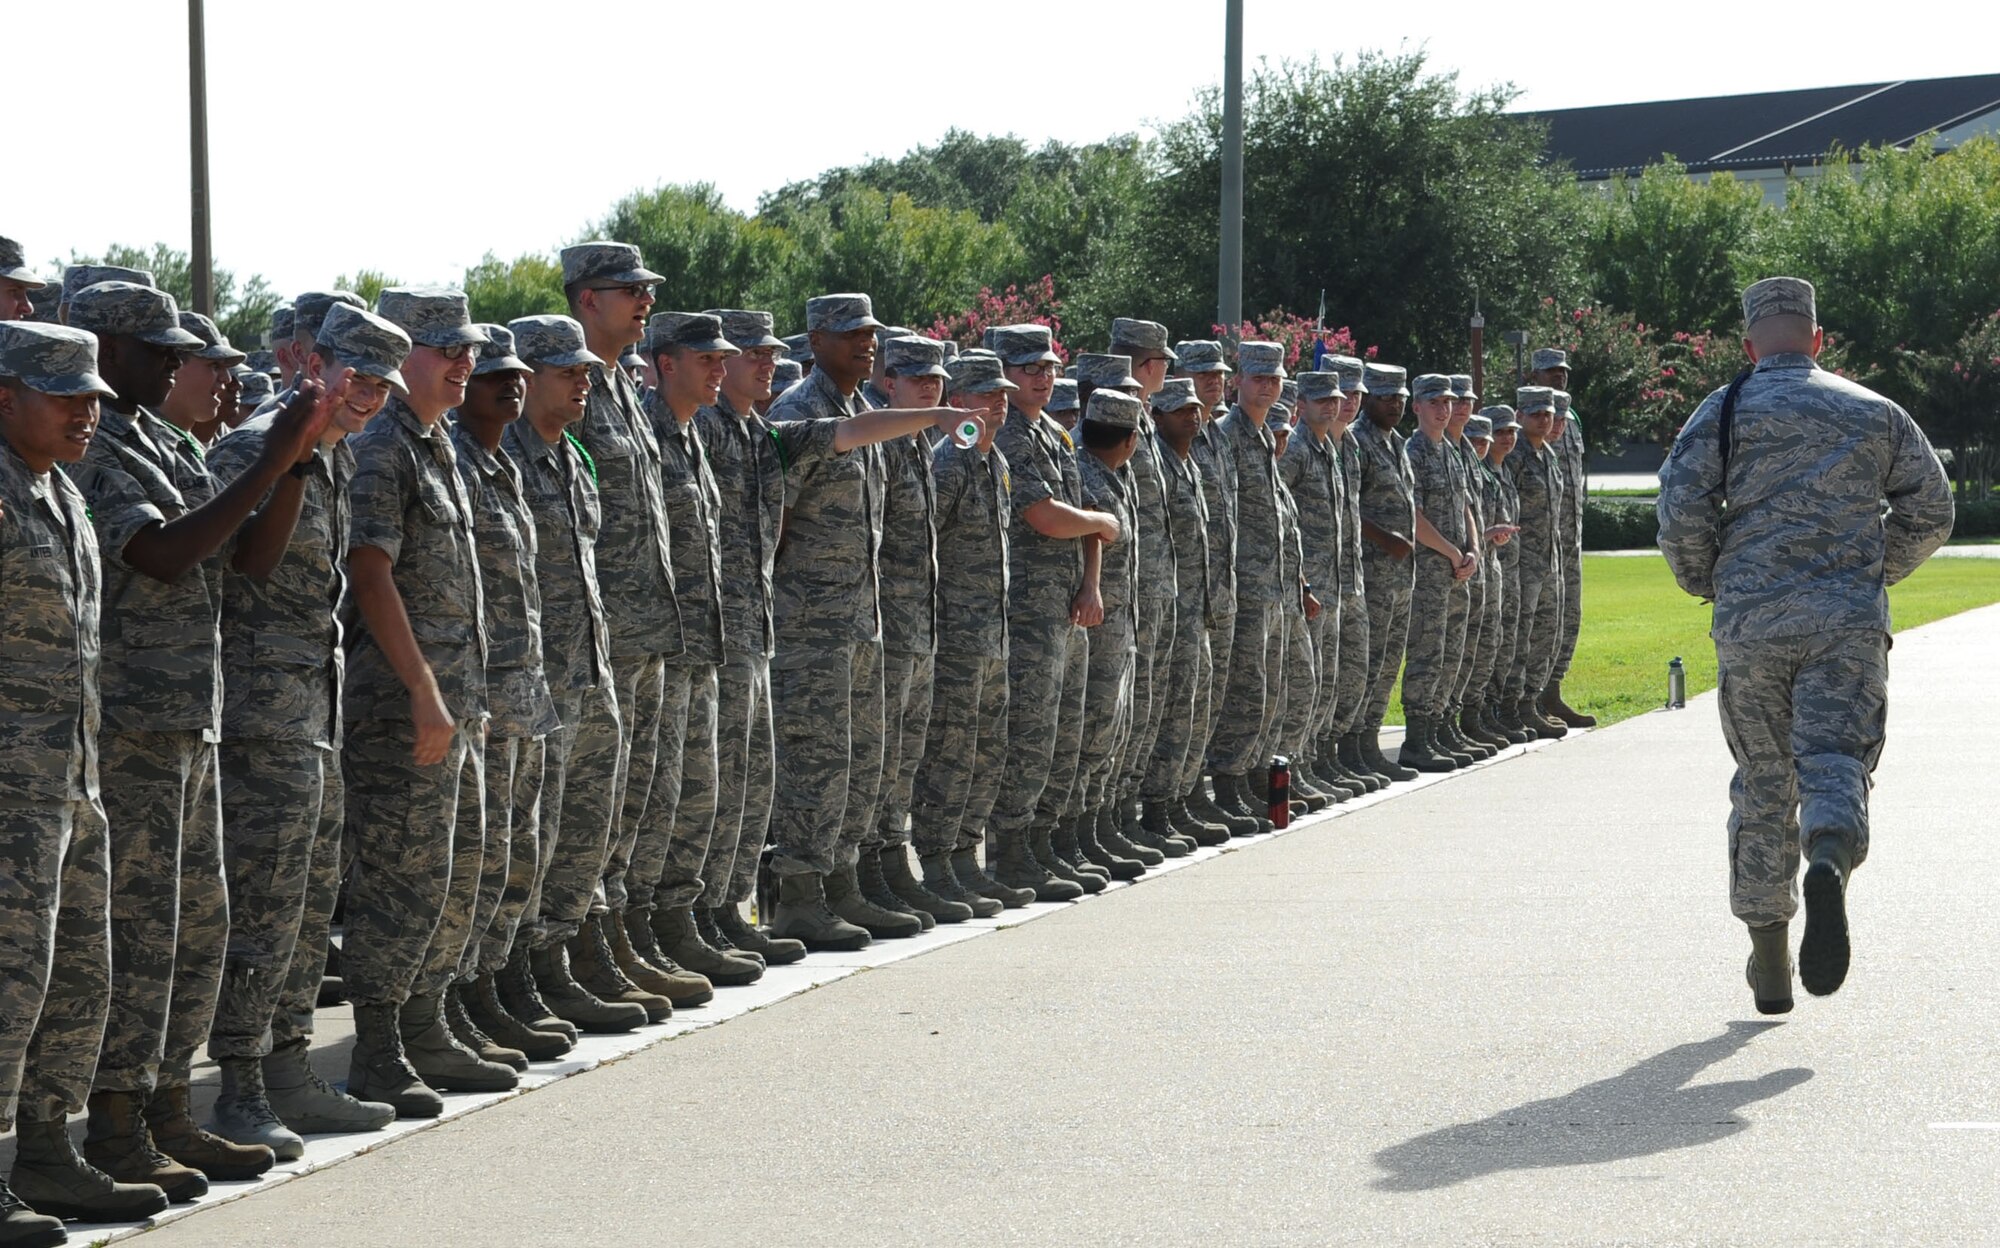 Staff Sgt. David Yawn, 336th Training Squadron military training leader, runs in front of 336th TRS Airmen after being awarded the second quarter Military Training Leader Dragon Award winner during the 81st Training Group Dragon Recognition Ceremony on the drill pad at the Levitow Training Support Facility July 28, 2016, on Keesler Air Force Base, Miss. The monthly event also recognized the Airman of the Month for June, the 2016 second quarter Military Training Flight of the Month and new Airmen promotees. (U.S. Air Force photo by Kemberly Groue/Released)